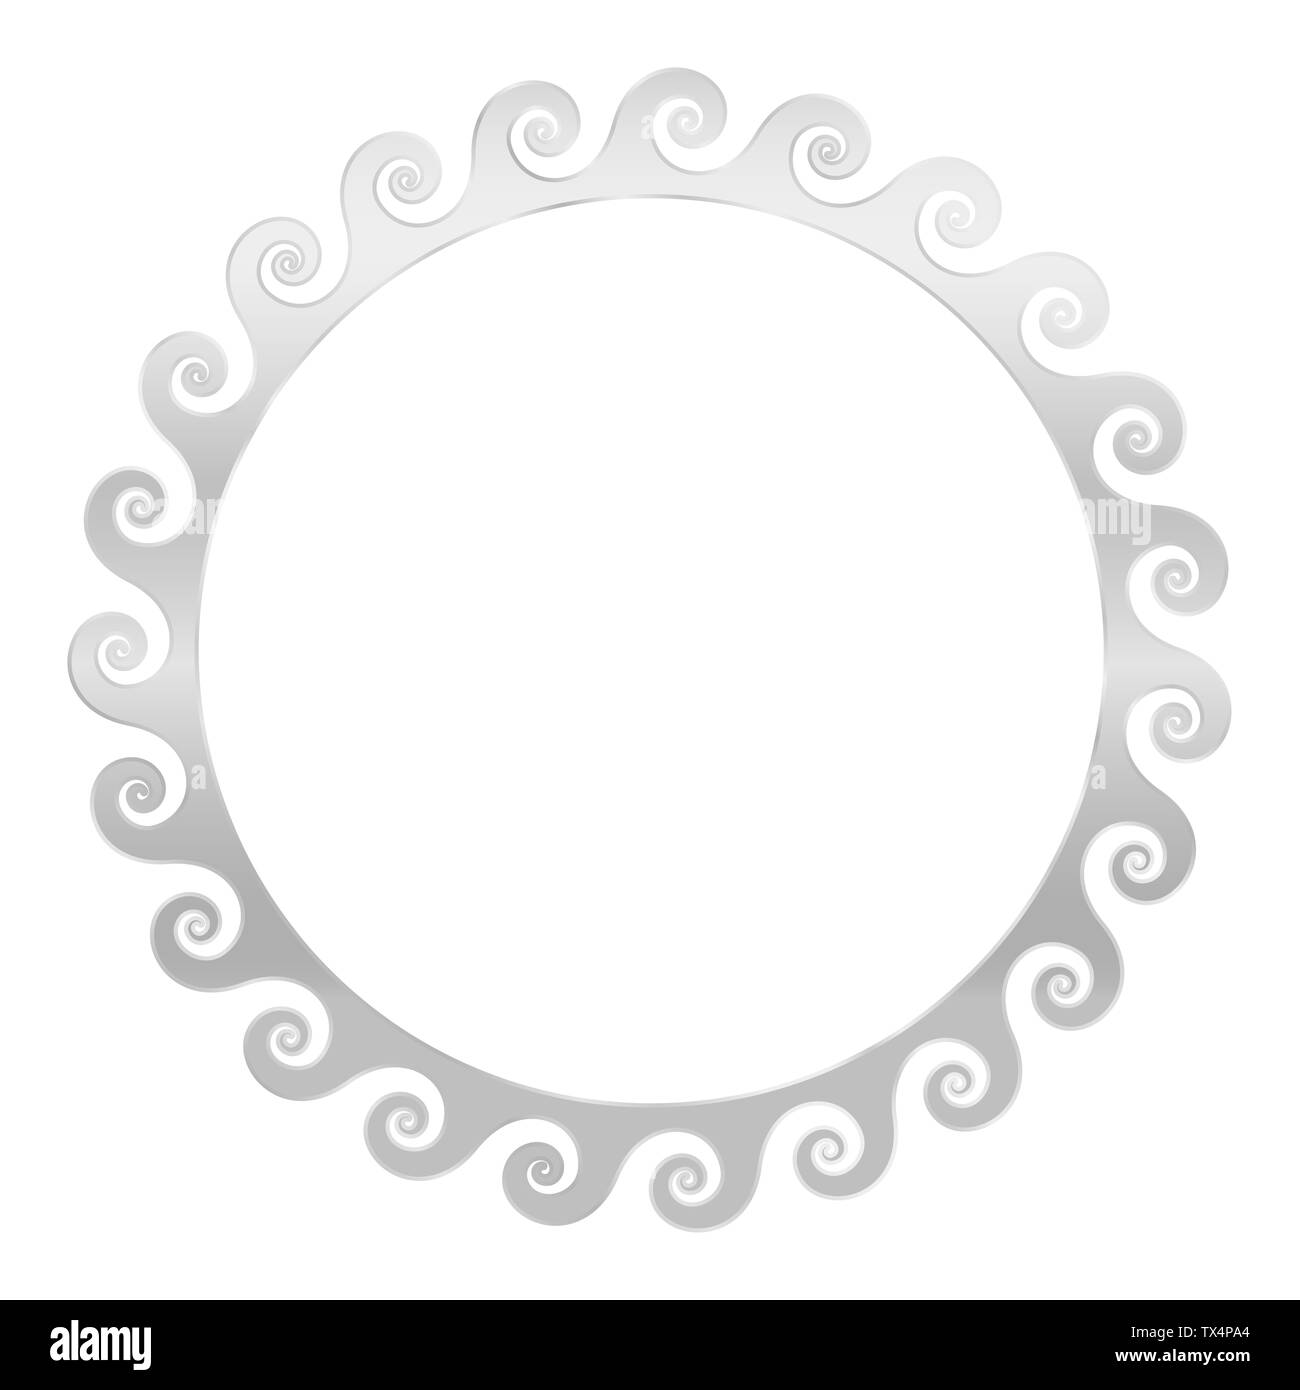 Silver spirals frame. Seamless meander pattern design. Waves shaped into repeated motif. Scroll pattern. Decorative border. Stock Photo